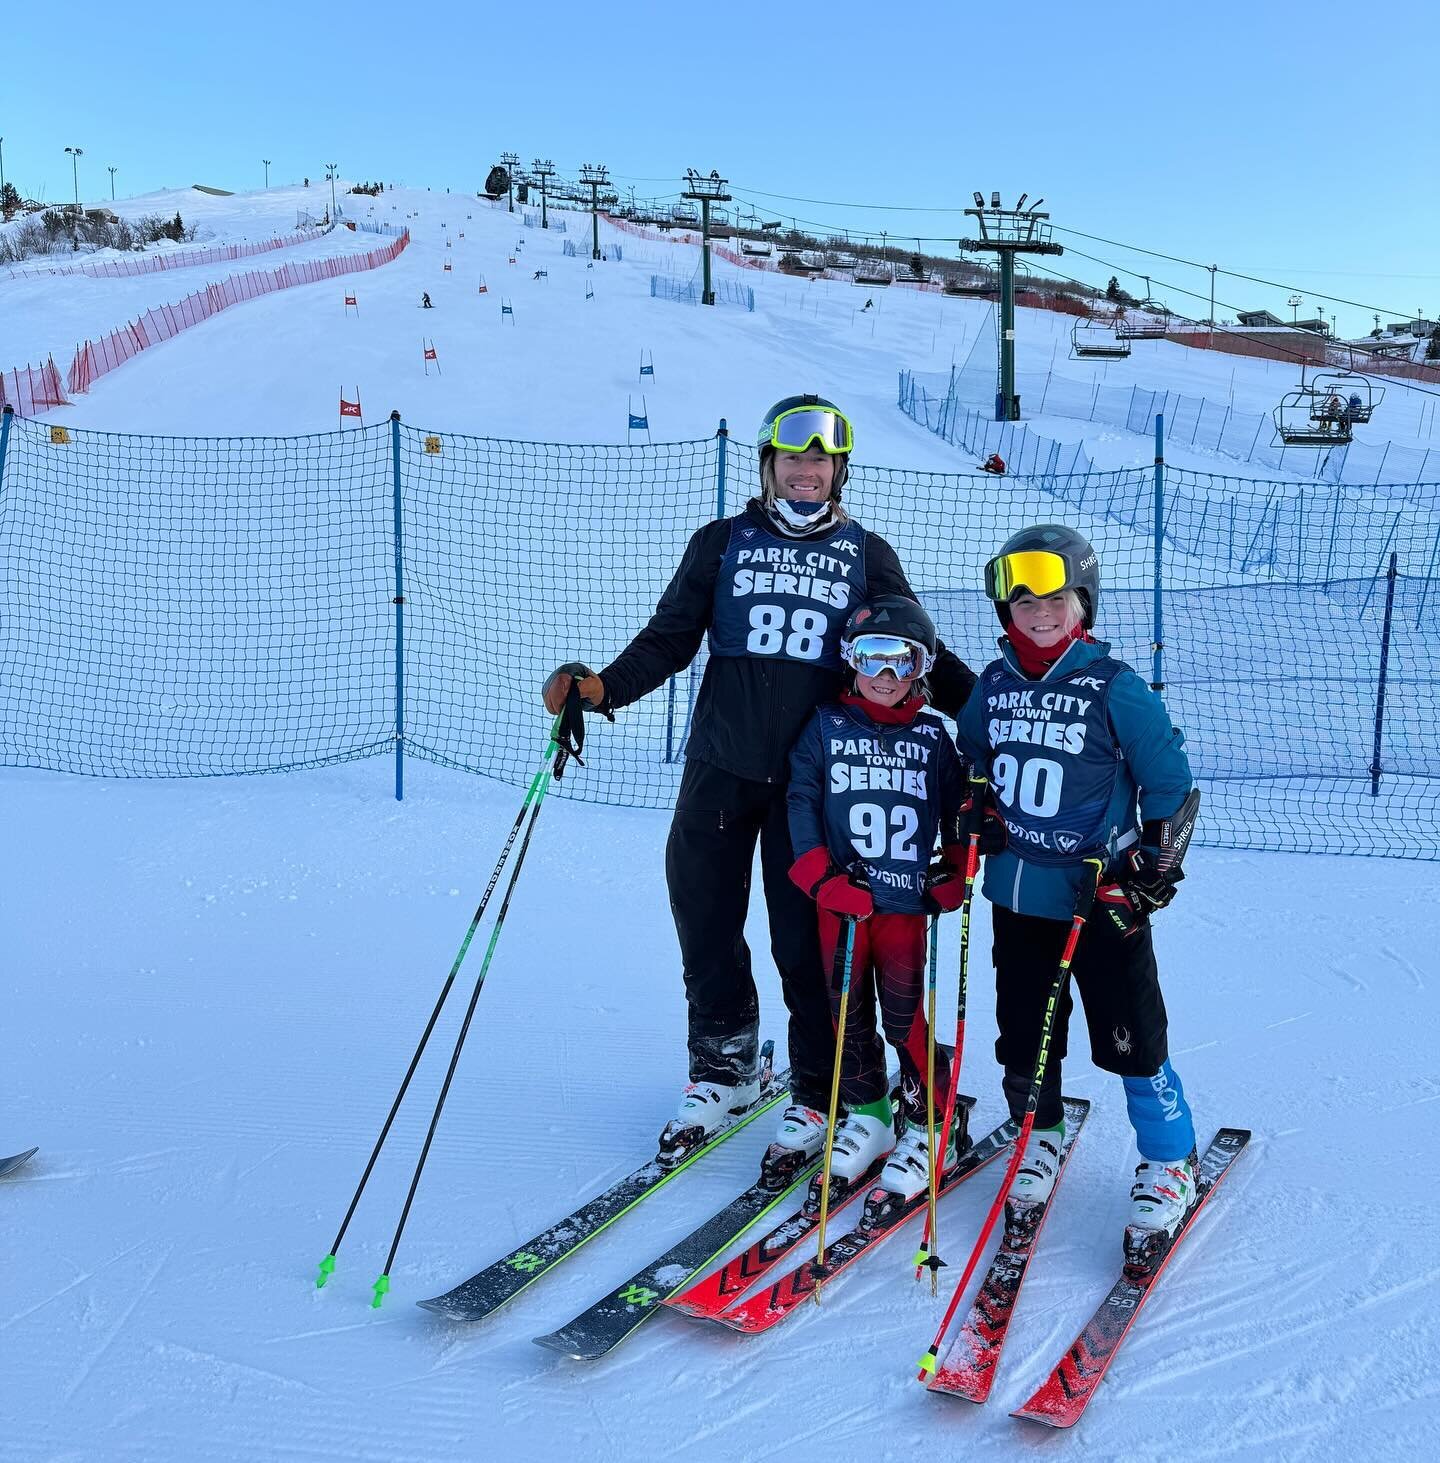 A weekend full of ski racing with the boys! Friday night, Saturday and Sunday! Safe to say that legs were tired and goggle tans are in full force ☀️ | wouldn&rsquo;t want it any other way!

#sbsef #thephillipsclub #v&ouml;lklskis #comeshredwithus